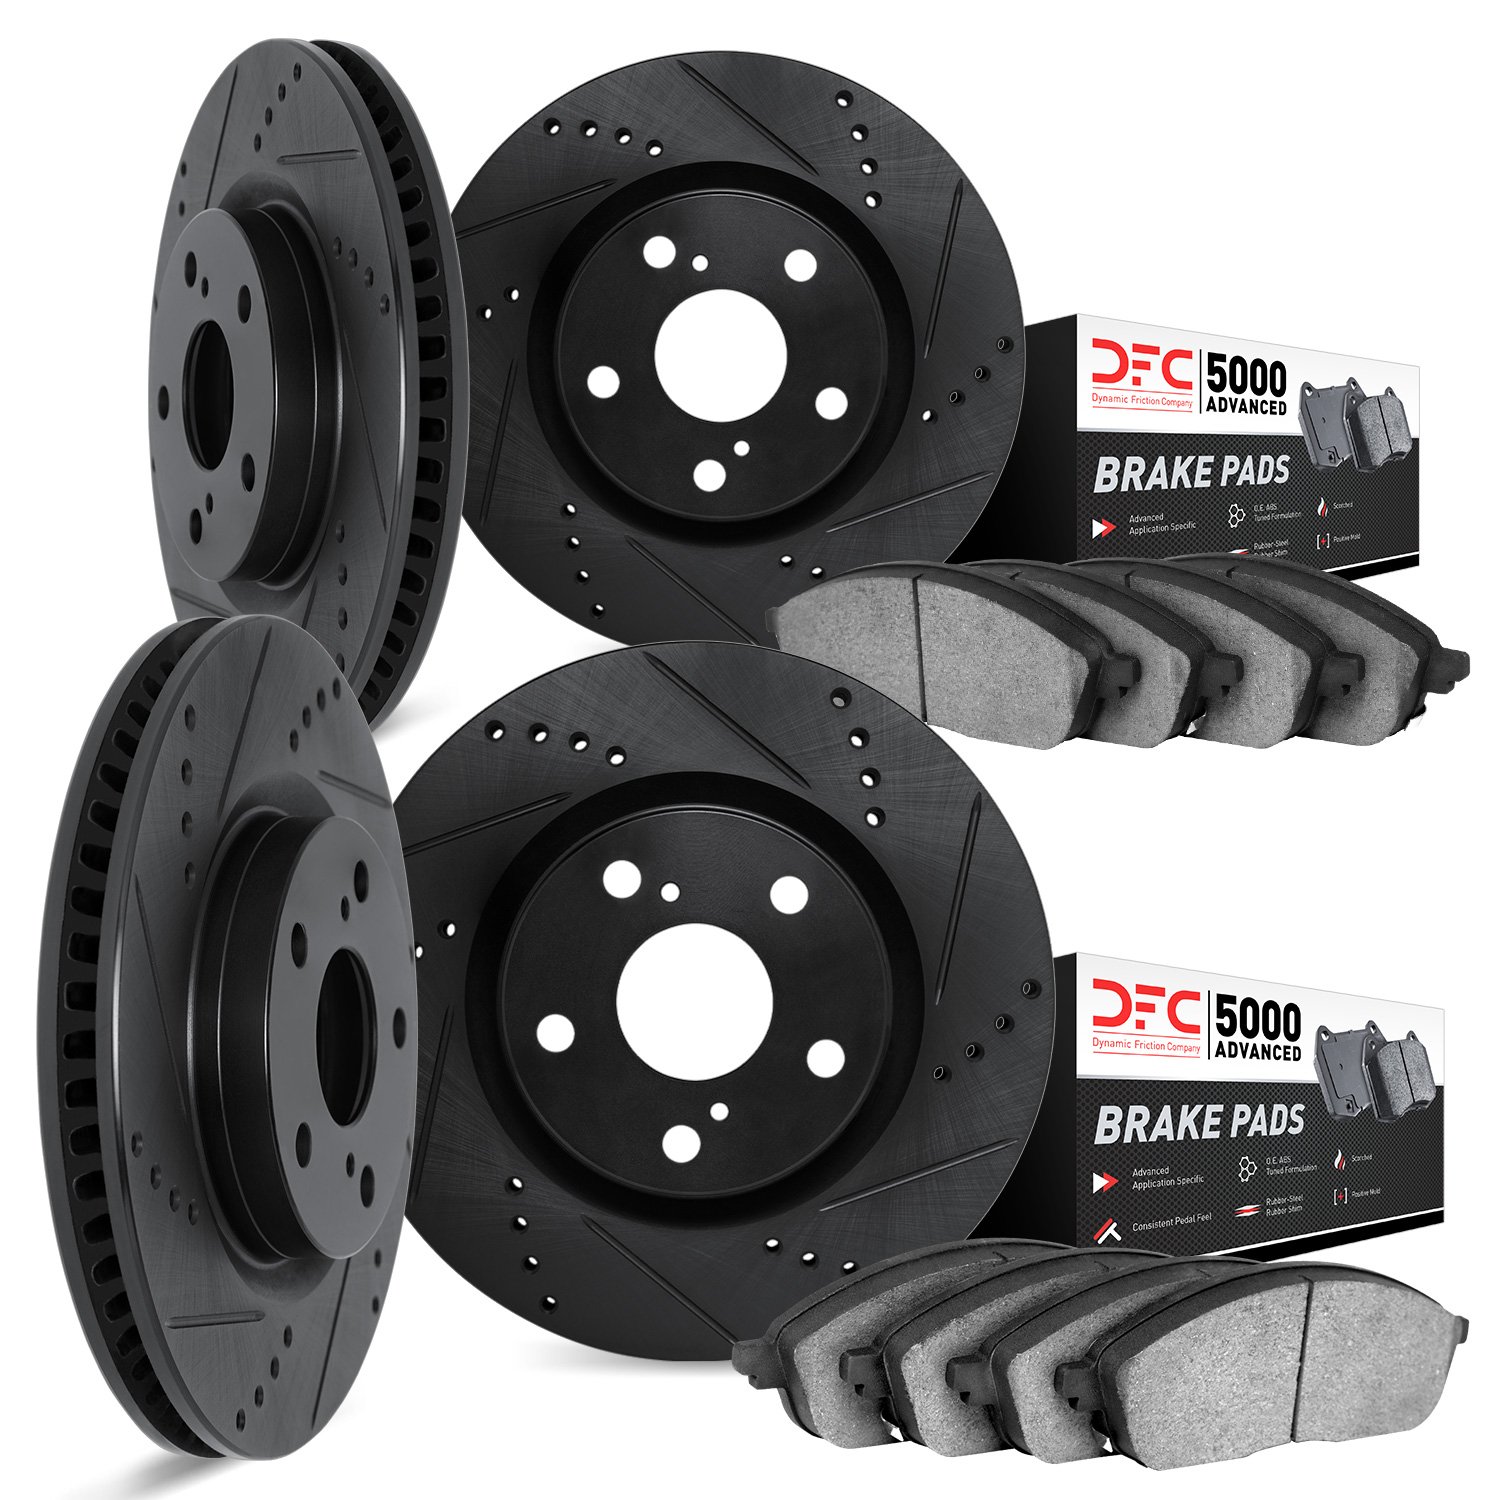 8504-13022 Drilled/Slotted Brake Rotors w/5000 Advanced Brake Pads Kit [Black], Fits Select Subaru, Position: Front and Rear